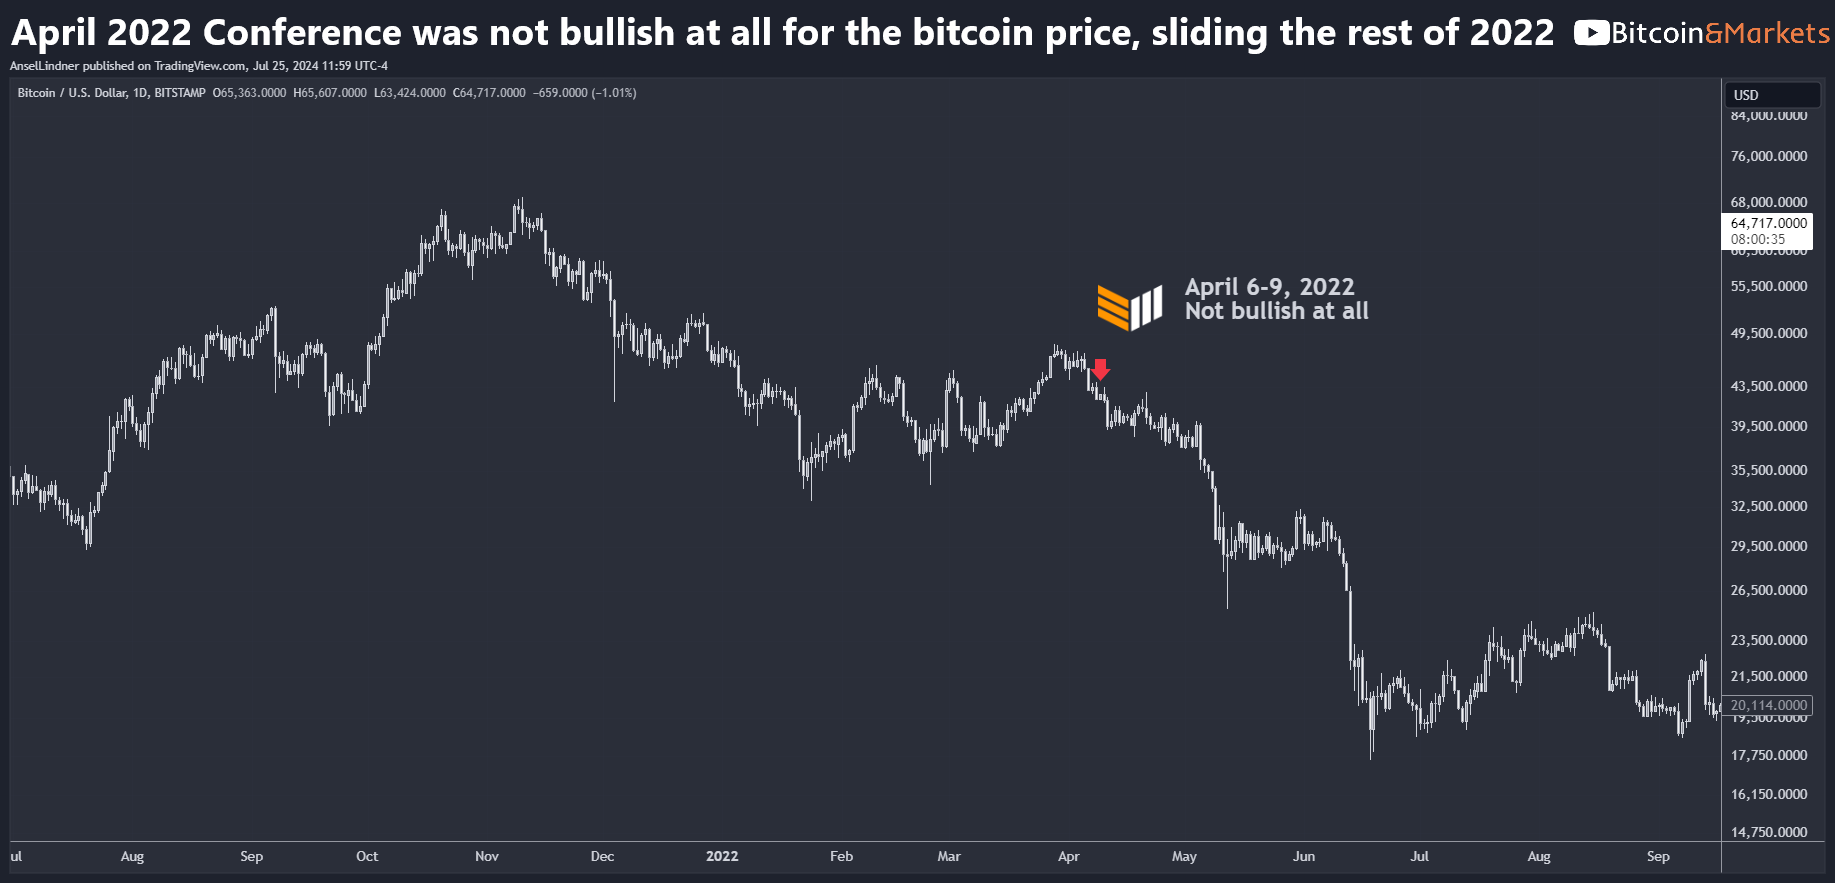 Bitcoin Minute: Historical Price Performance During Bitcoin Conferences